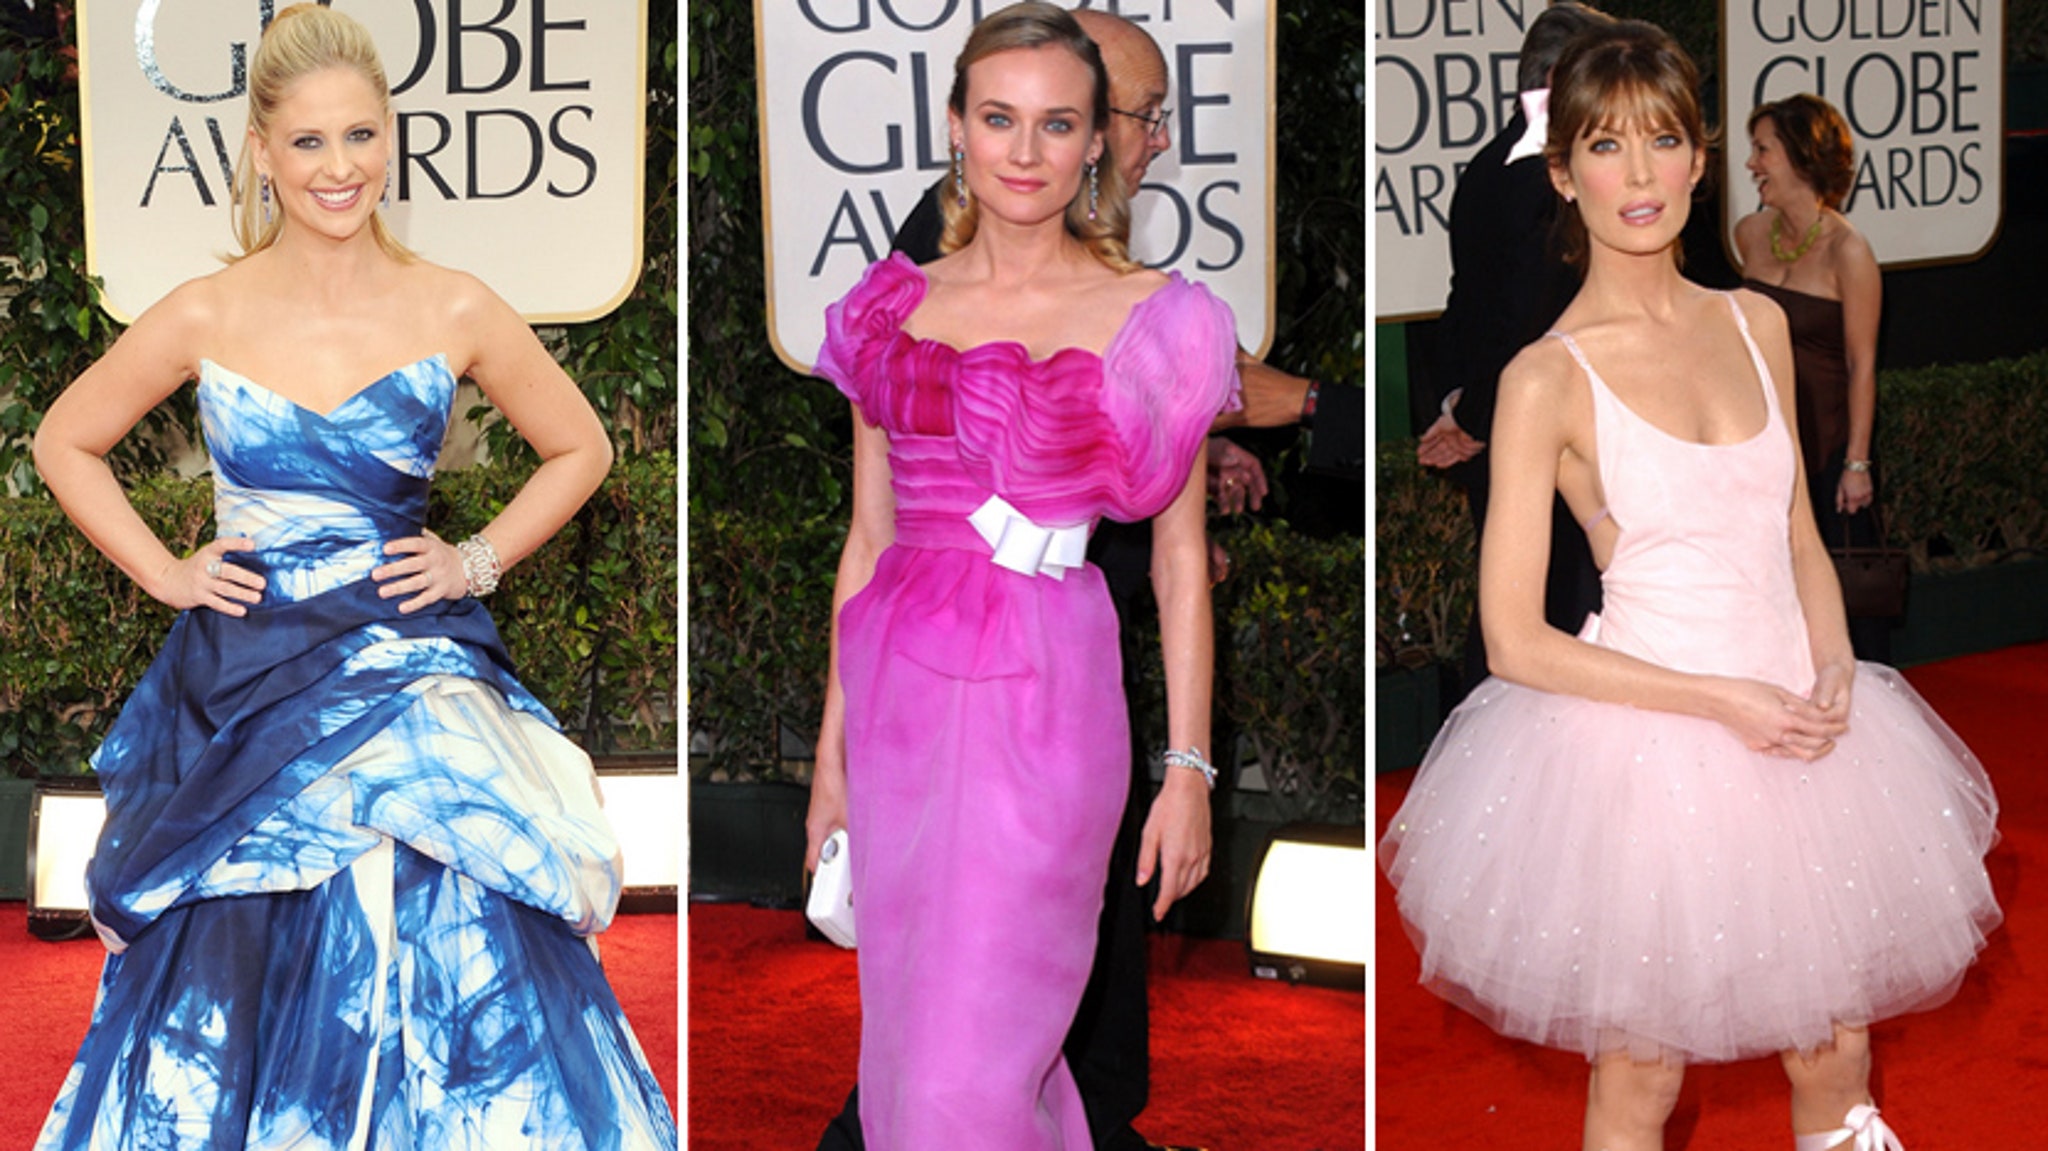 The Worst Dressed Stars of Golden Globes' Past!